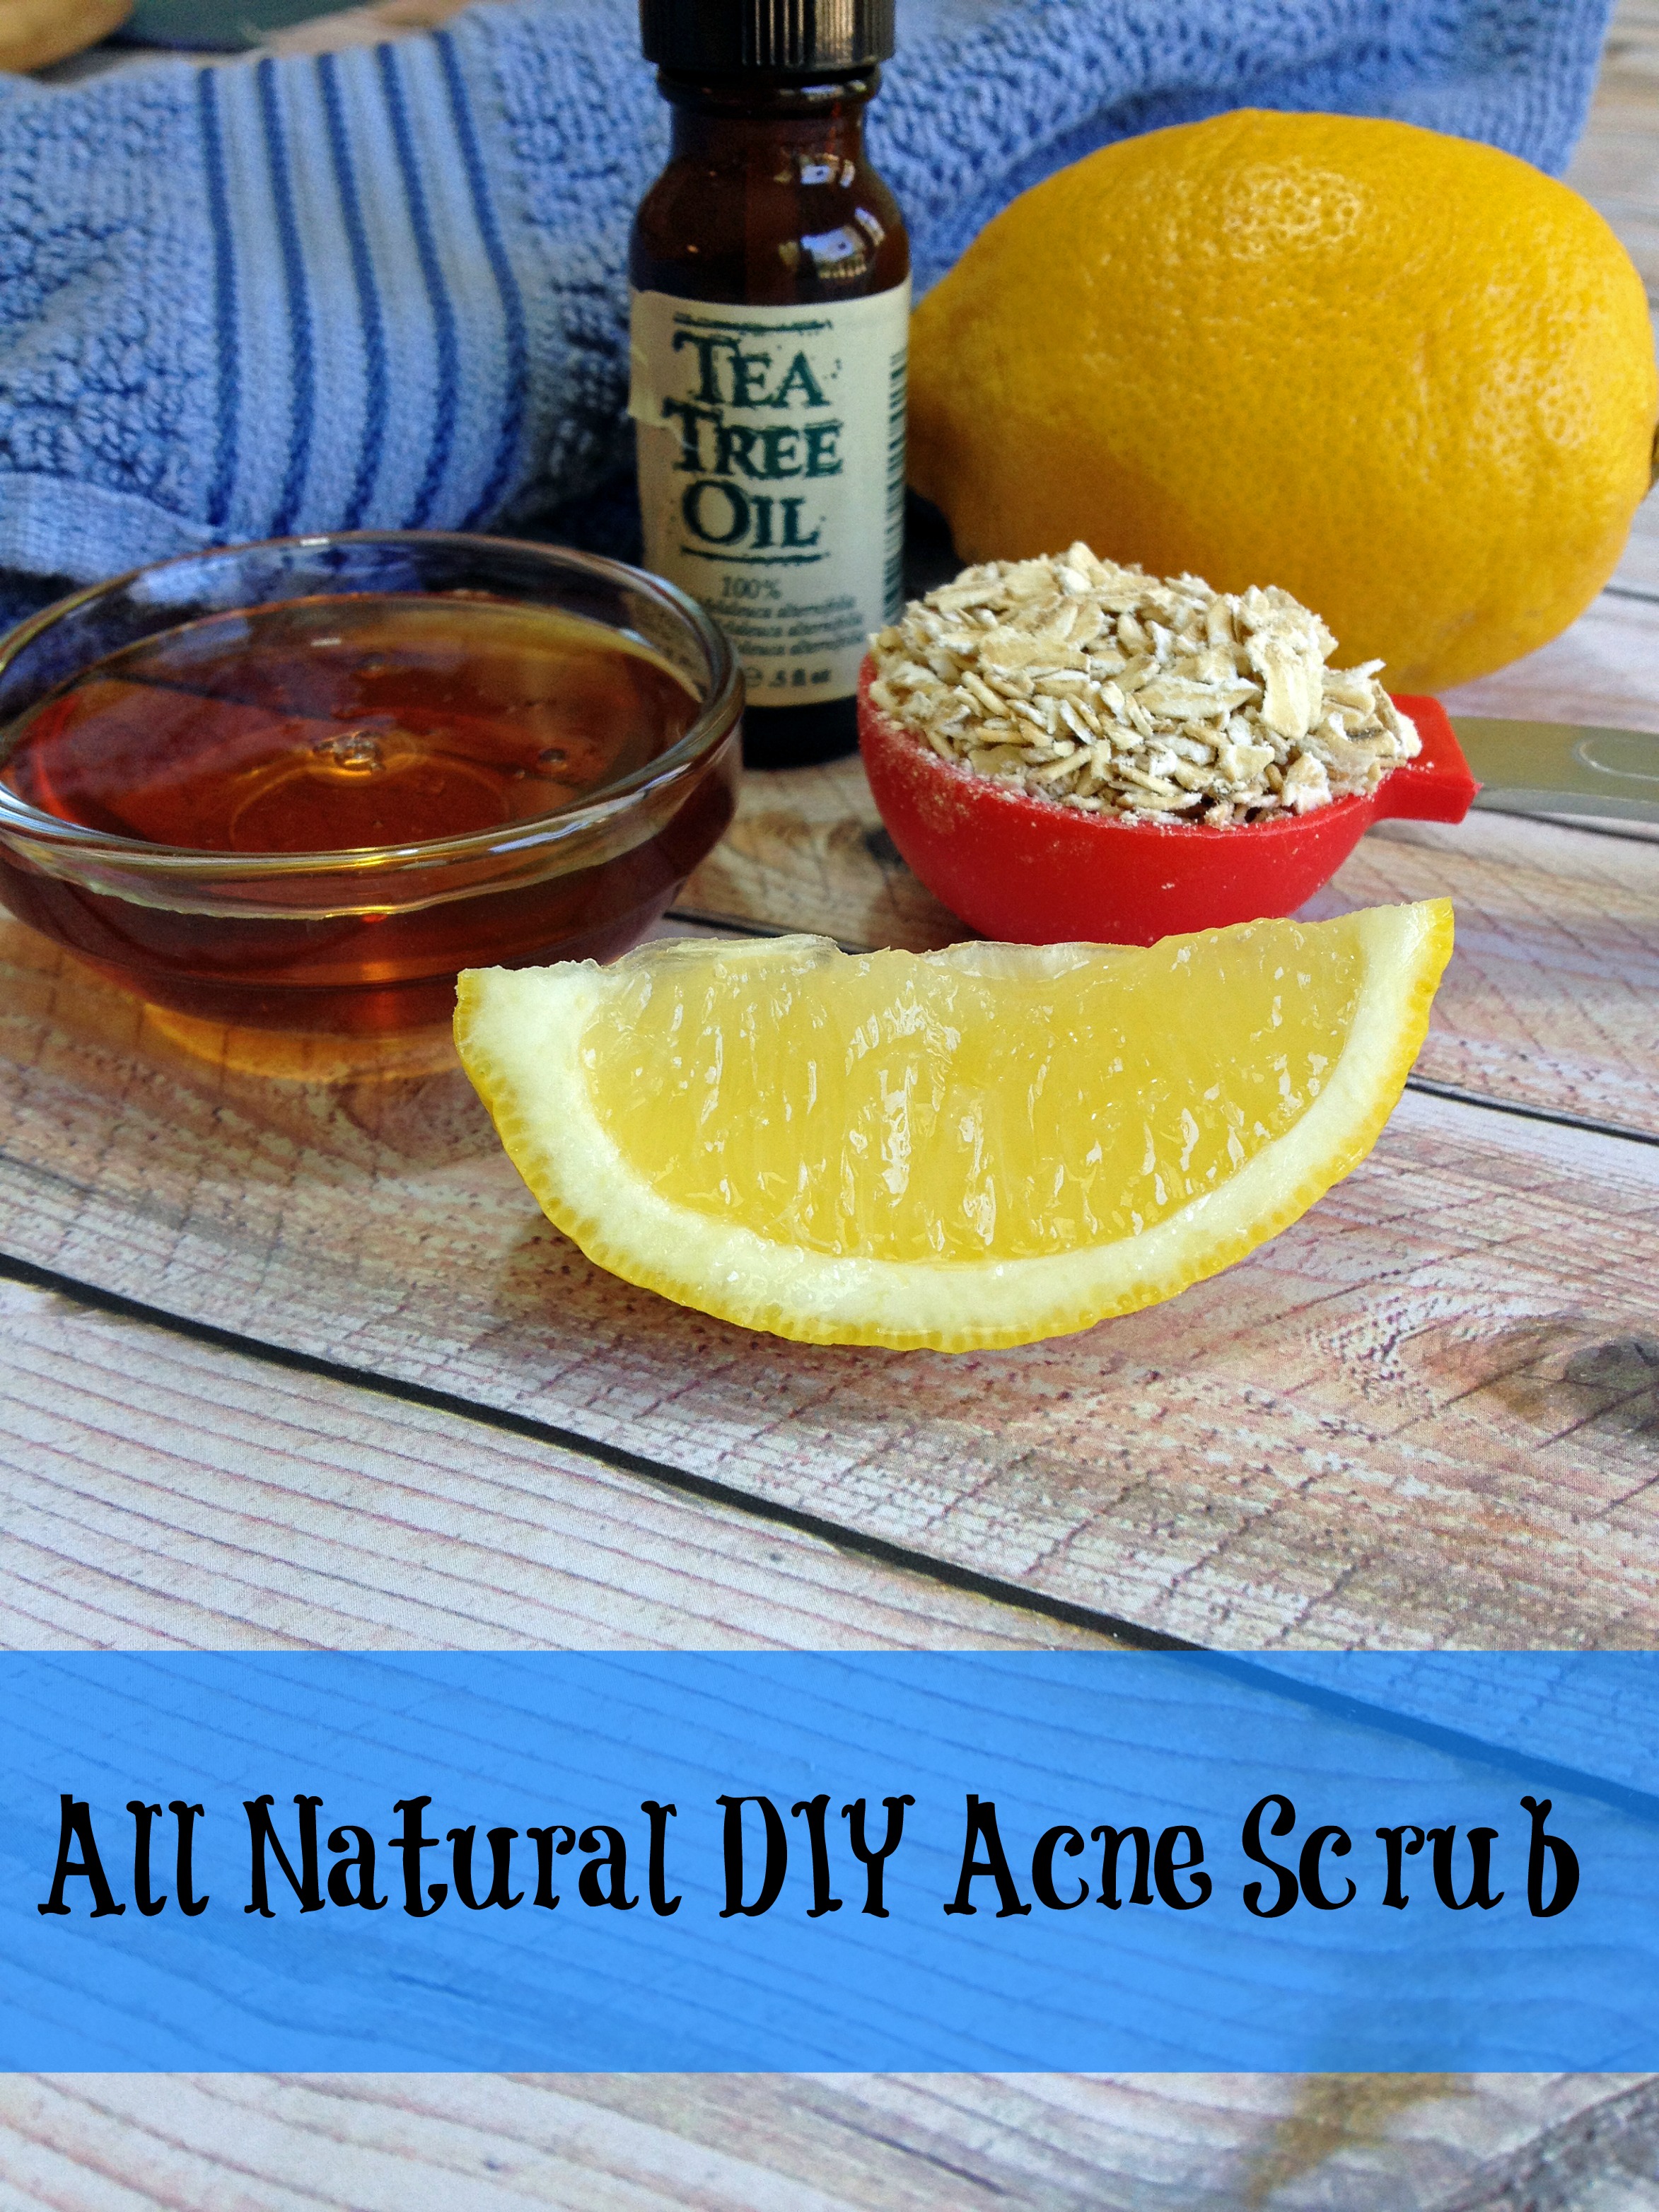  The Best Homemade Skin Care Recipes | Homesteading Hacks Every Homesteader Should Know 